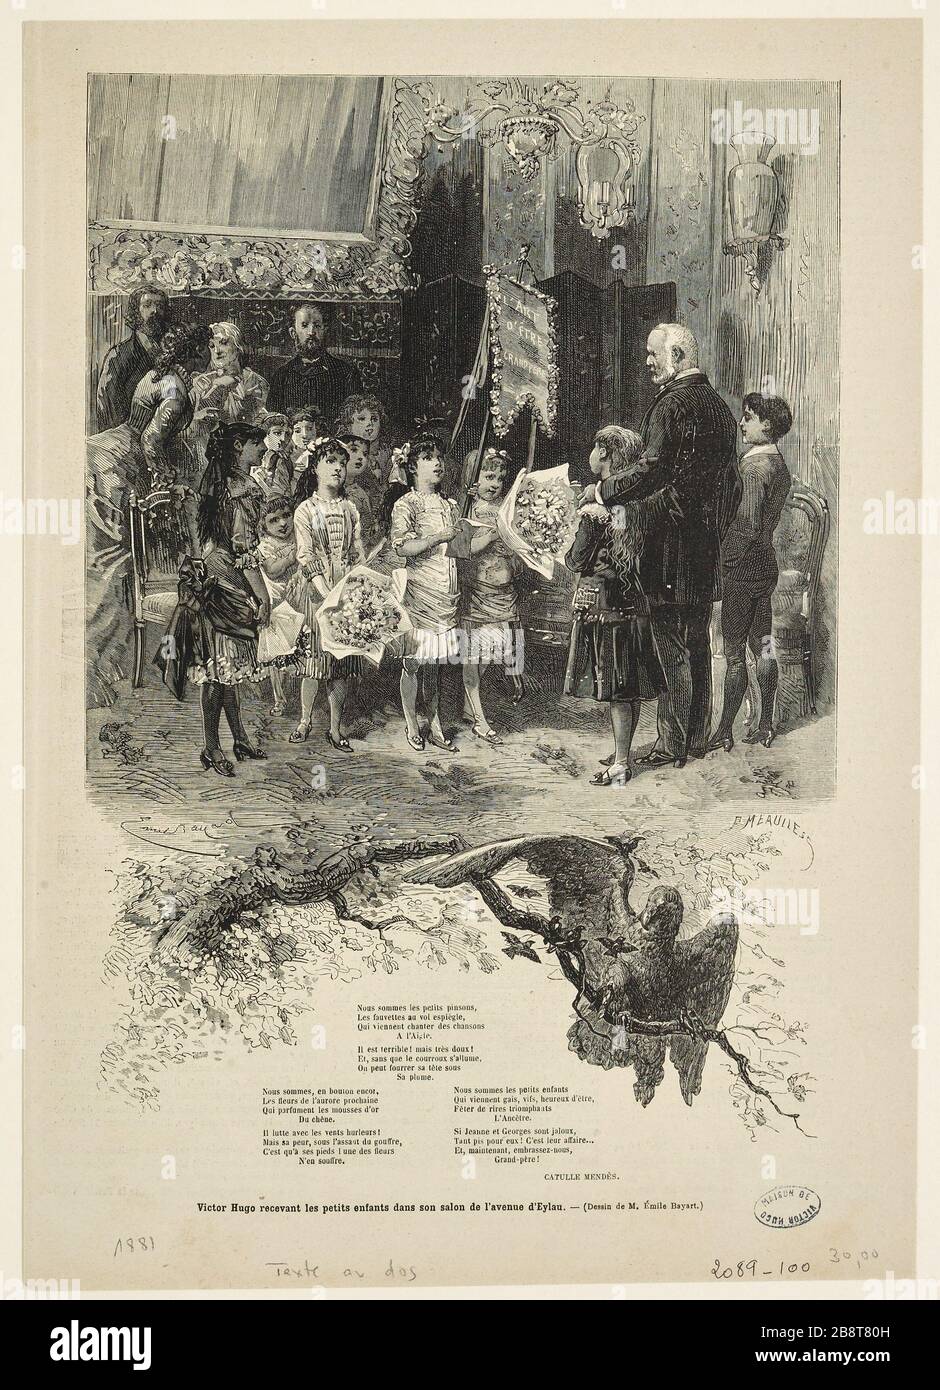 Victor Hugo receiving small children in the living room of the Avenue d'Eylau. Stock Photo